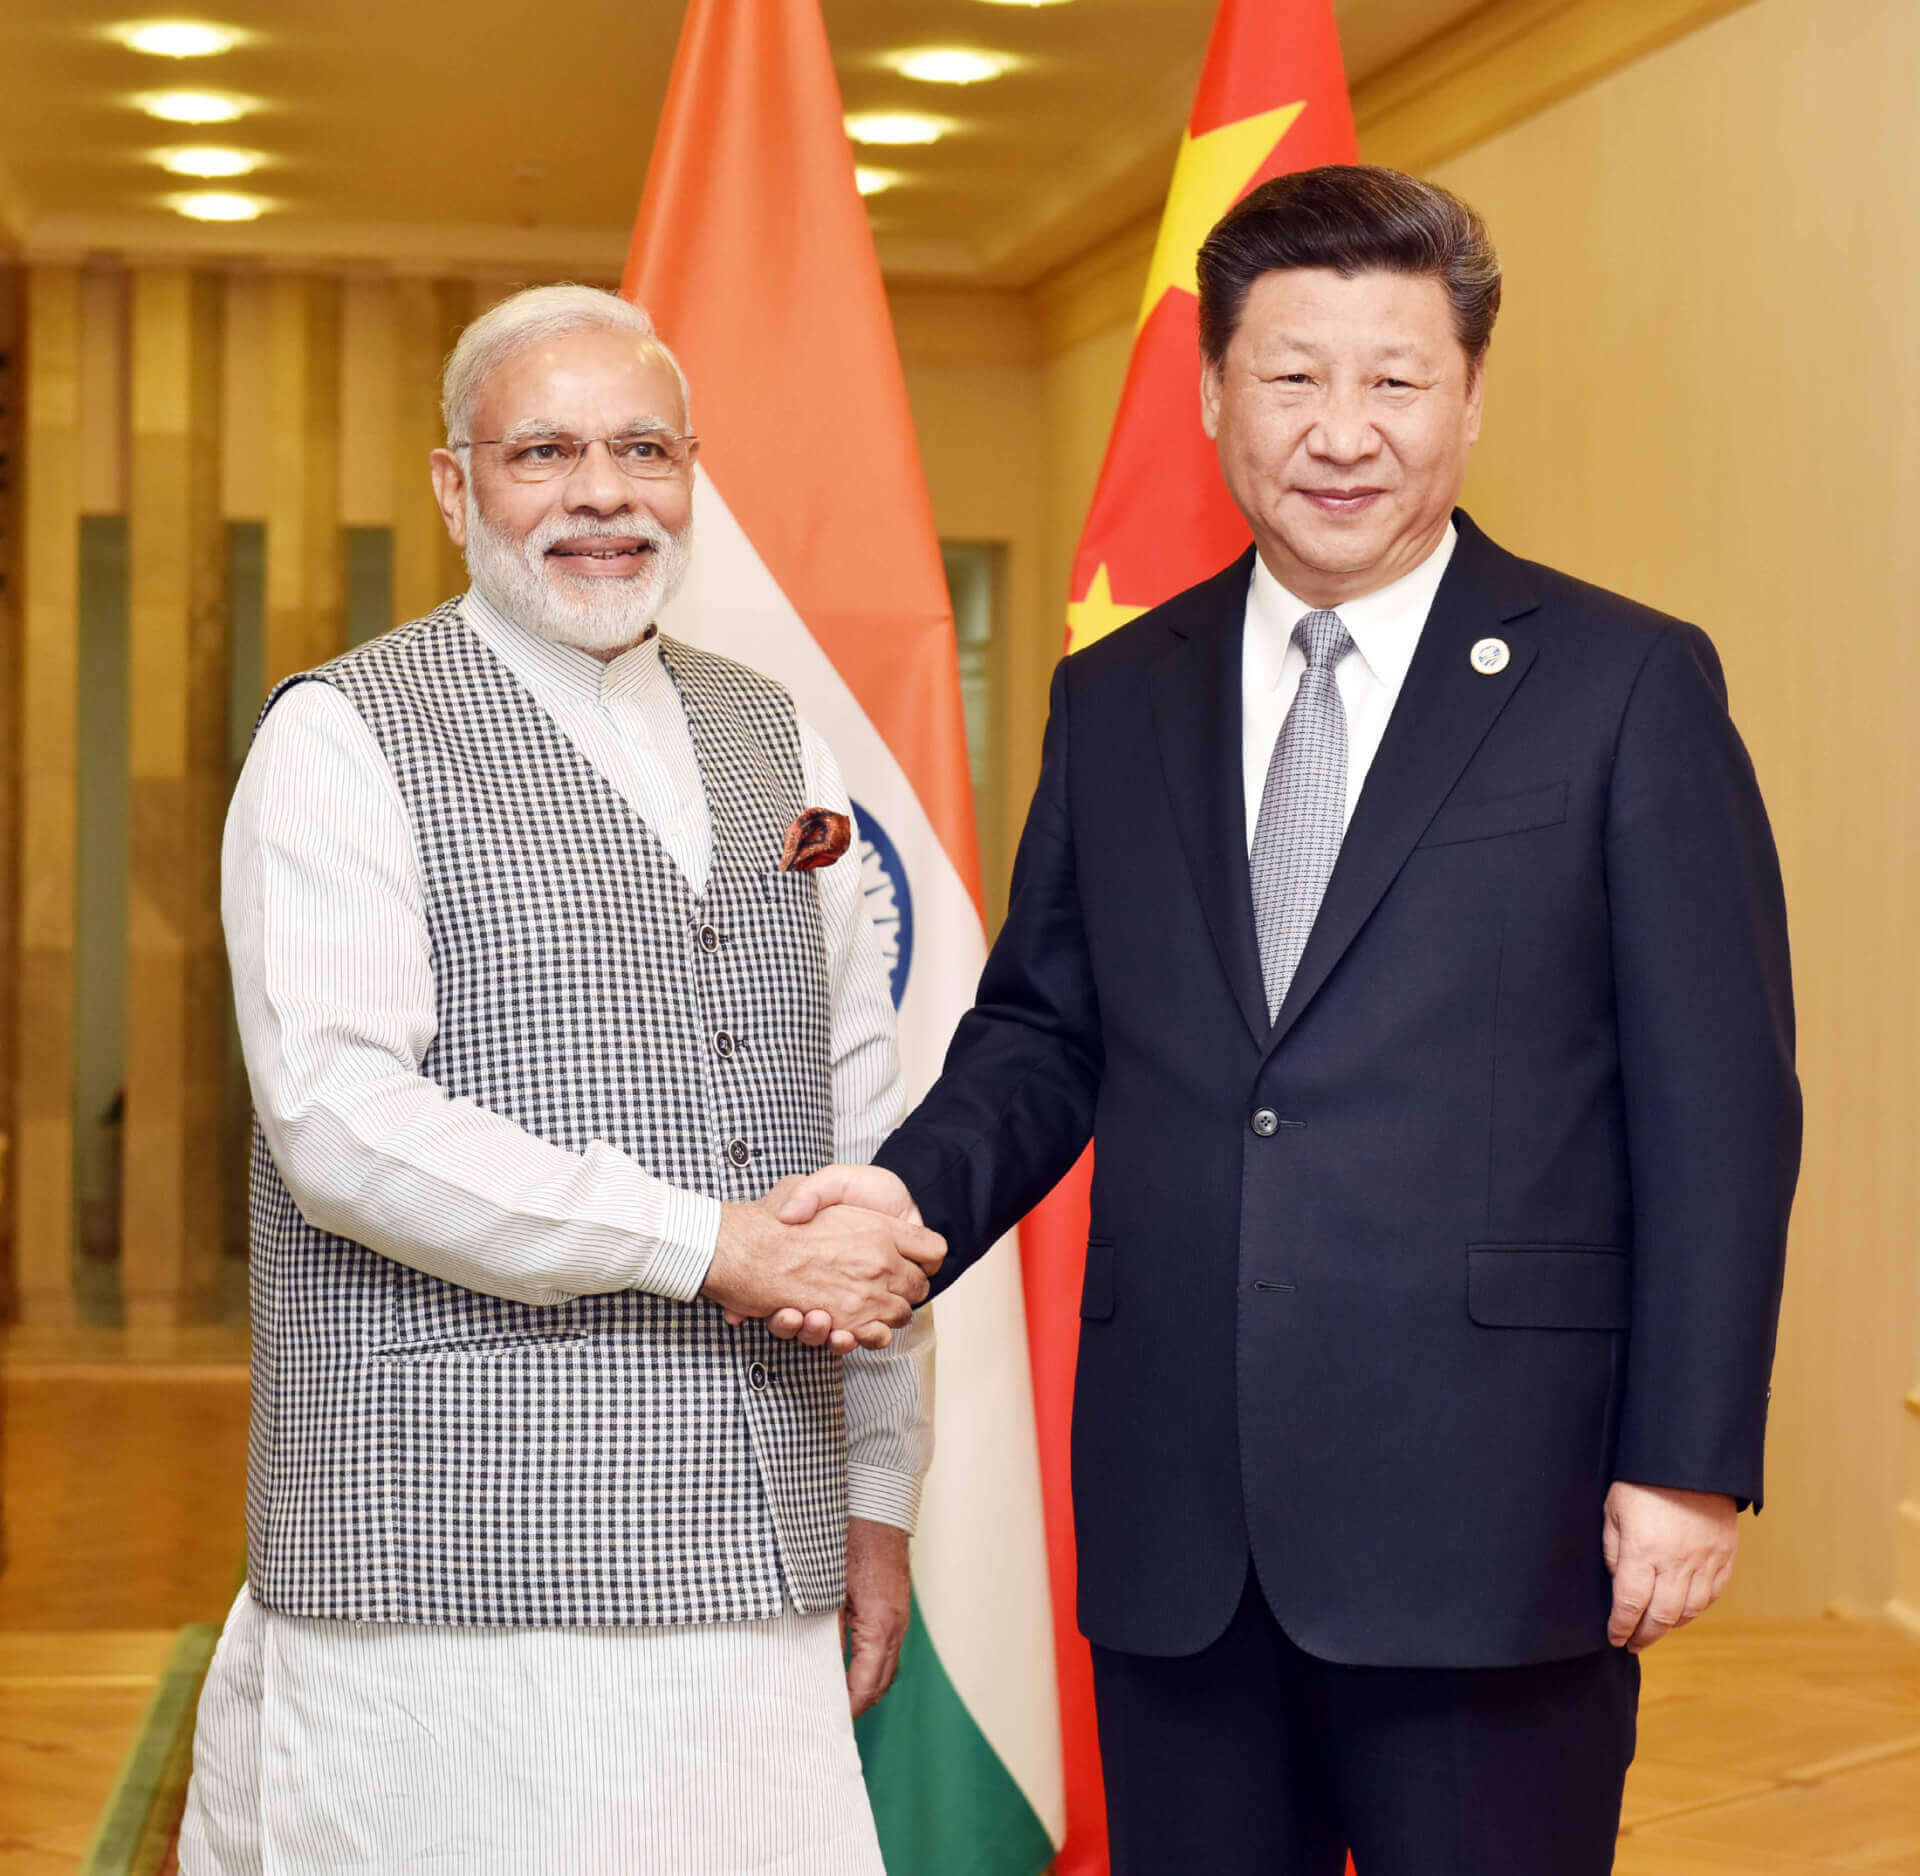 Chinese Citizens’ View of India: Insights From a Reporter in Beijing